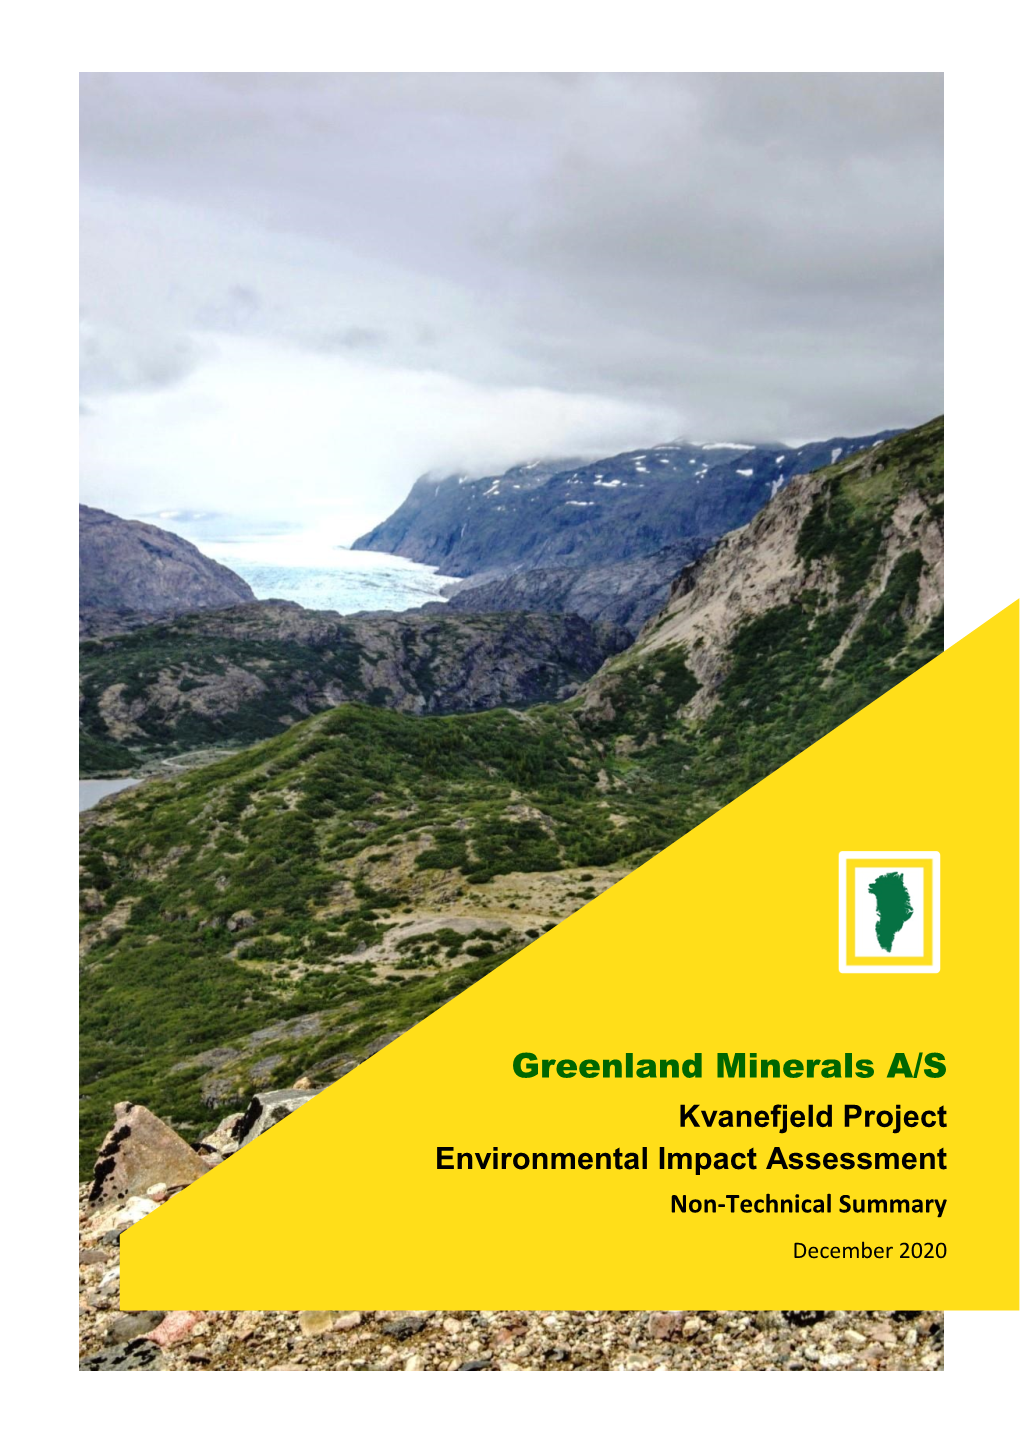 Greenland Minerals A/S Kvanefjeld Project Environmental Impact Assessment Non-Technical Summary